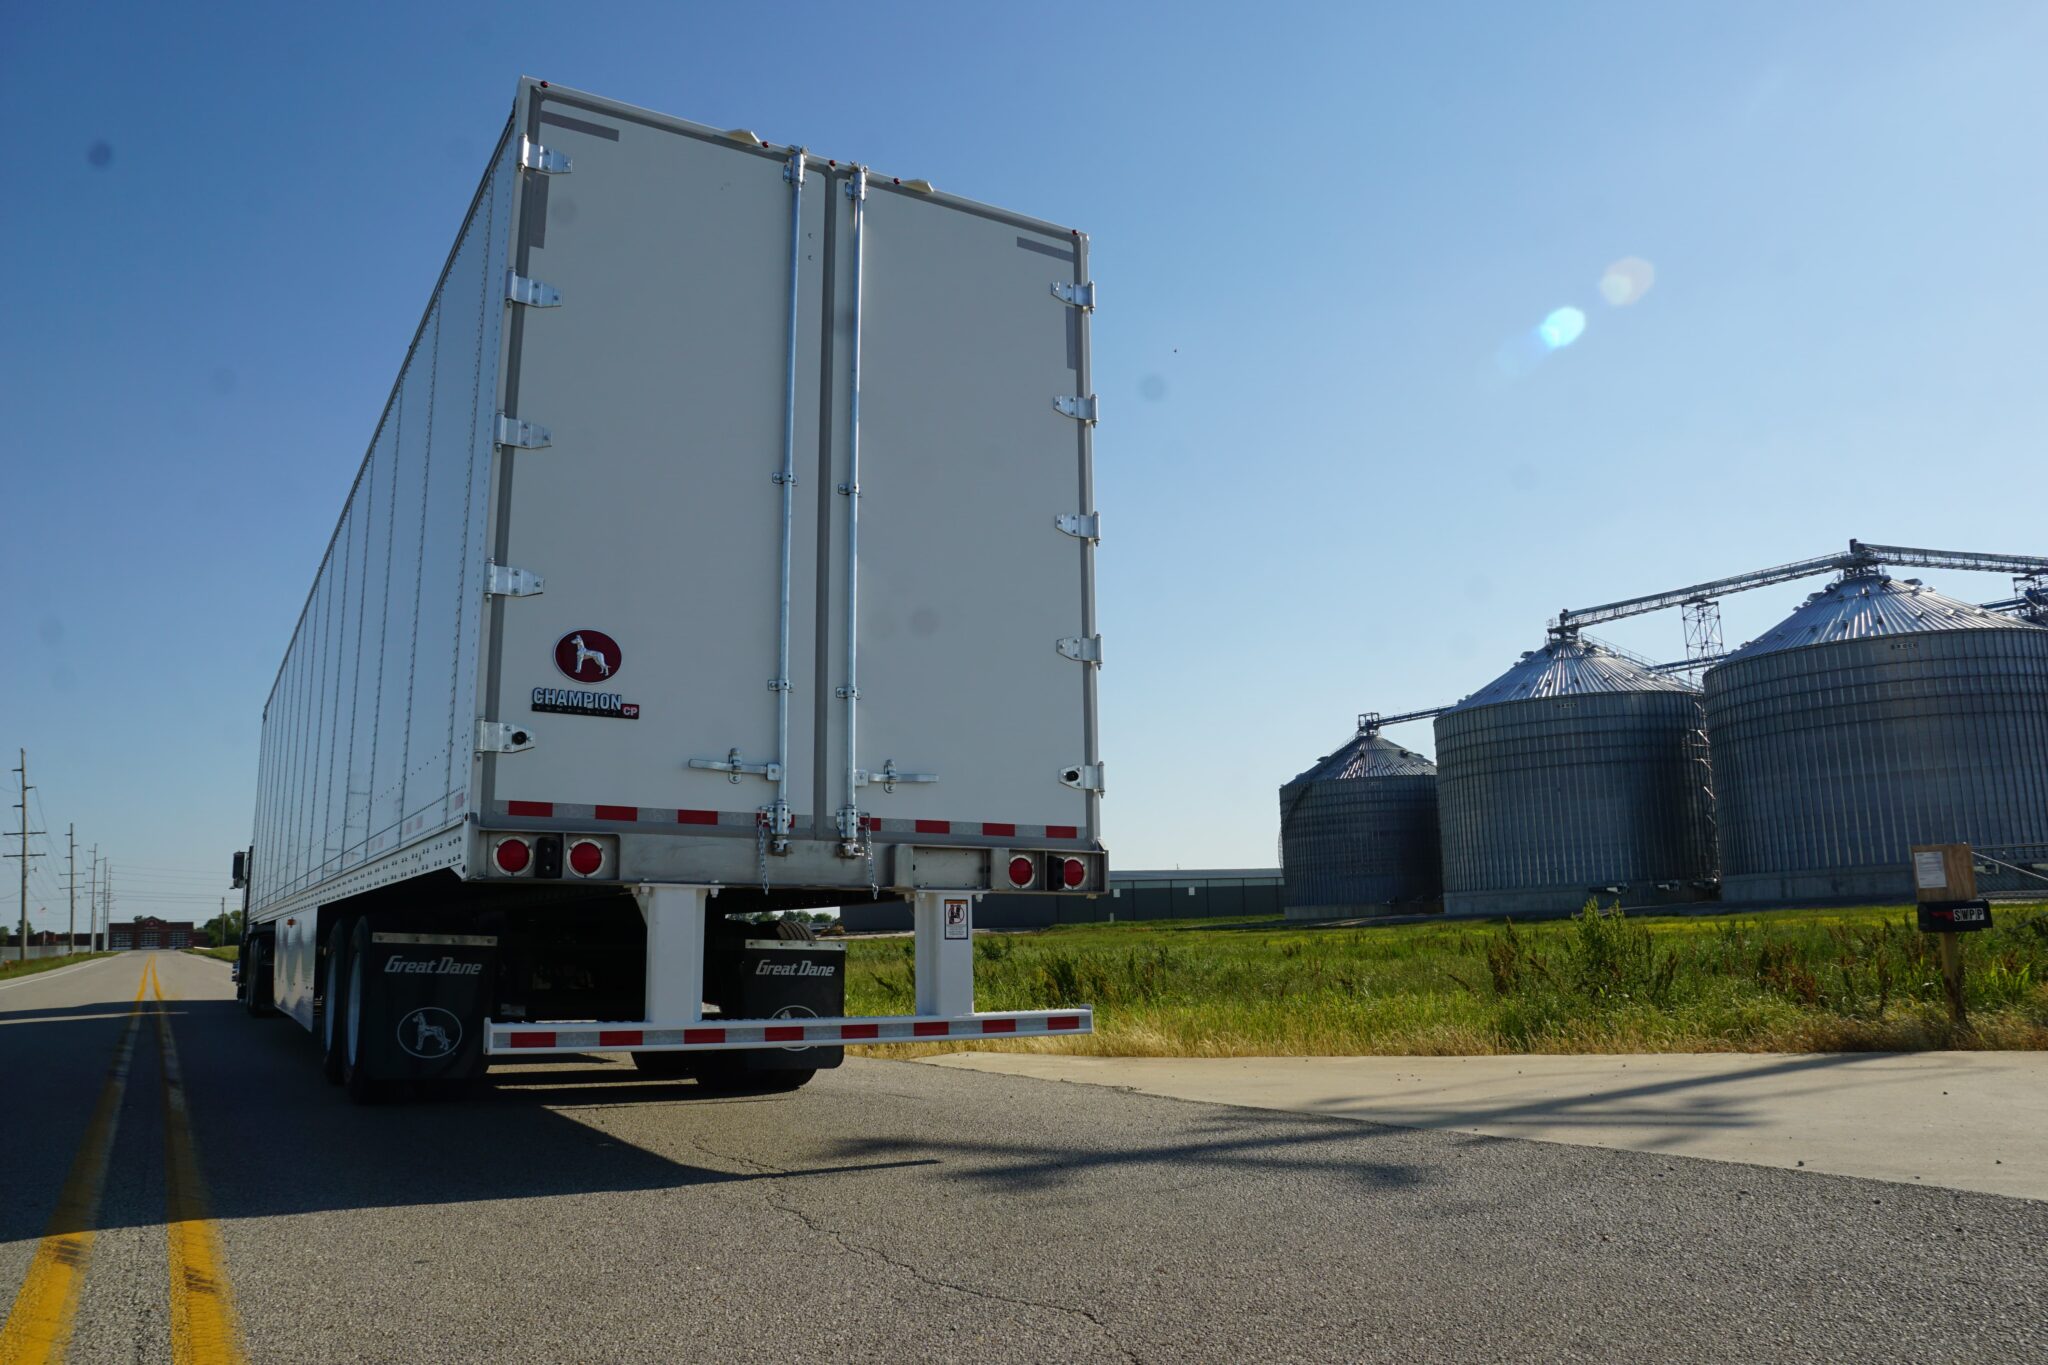 Trailer orders year-over-year down, analysts report